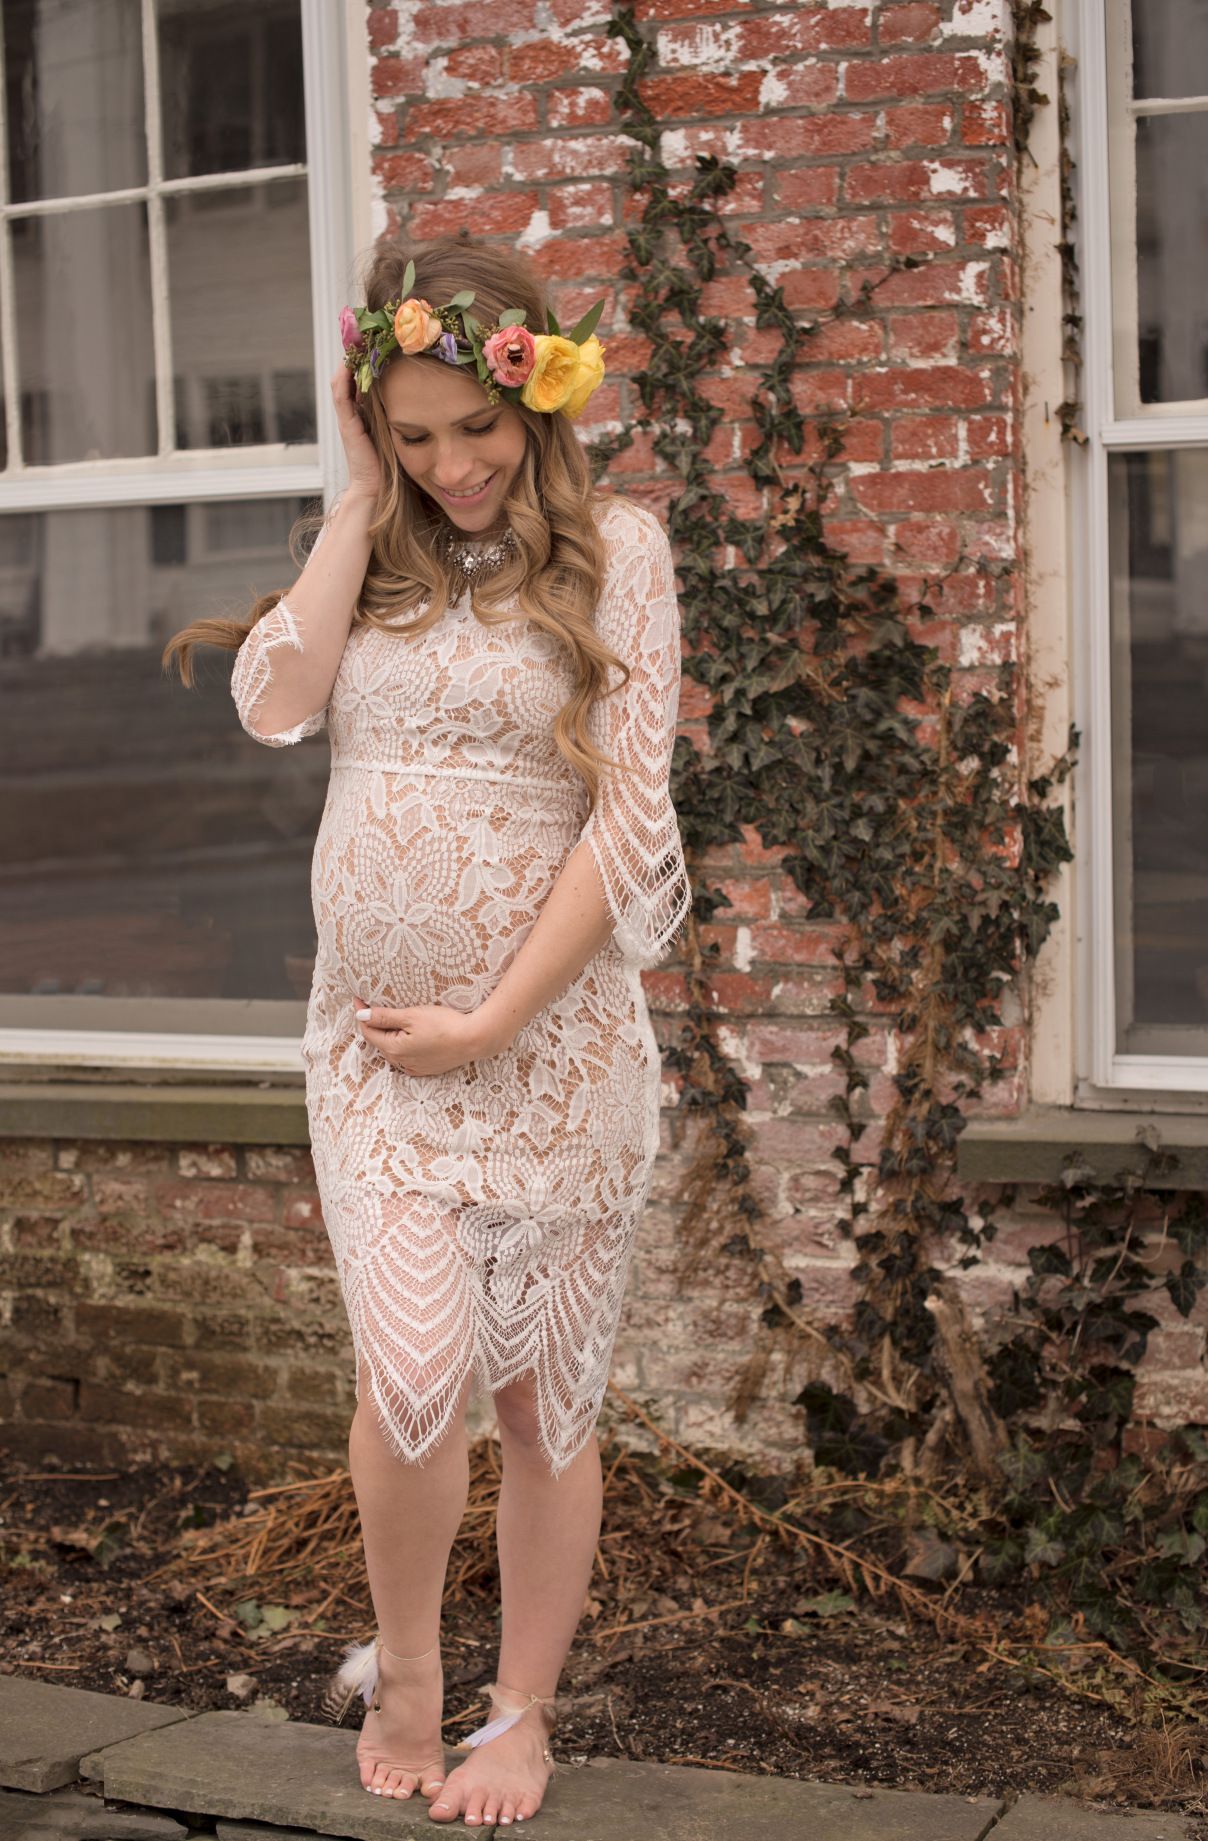 Full Size of Baby Shower:maternity Clothes H&m Showing Lsi Keywords For Baby Shower Dresses Maternity Evening Gowns Non Maternity Dresses For Baby Shower Baby Shower Dresses Cute Inexpensive Maternity Clothes Maternity Evening Gowns Plus Size Maternity Dresses For Baby Shower